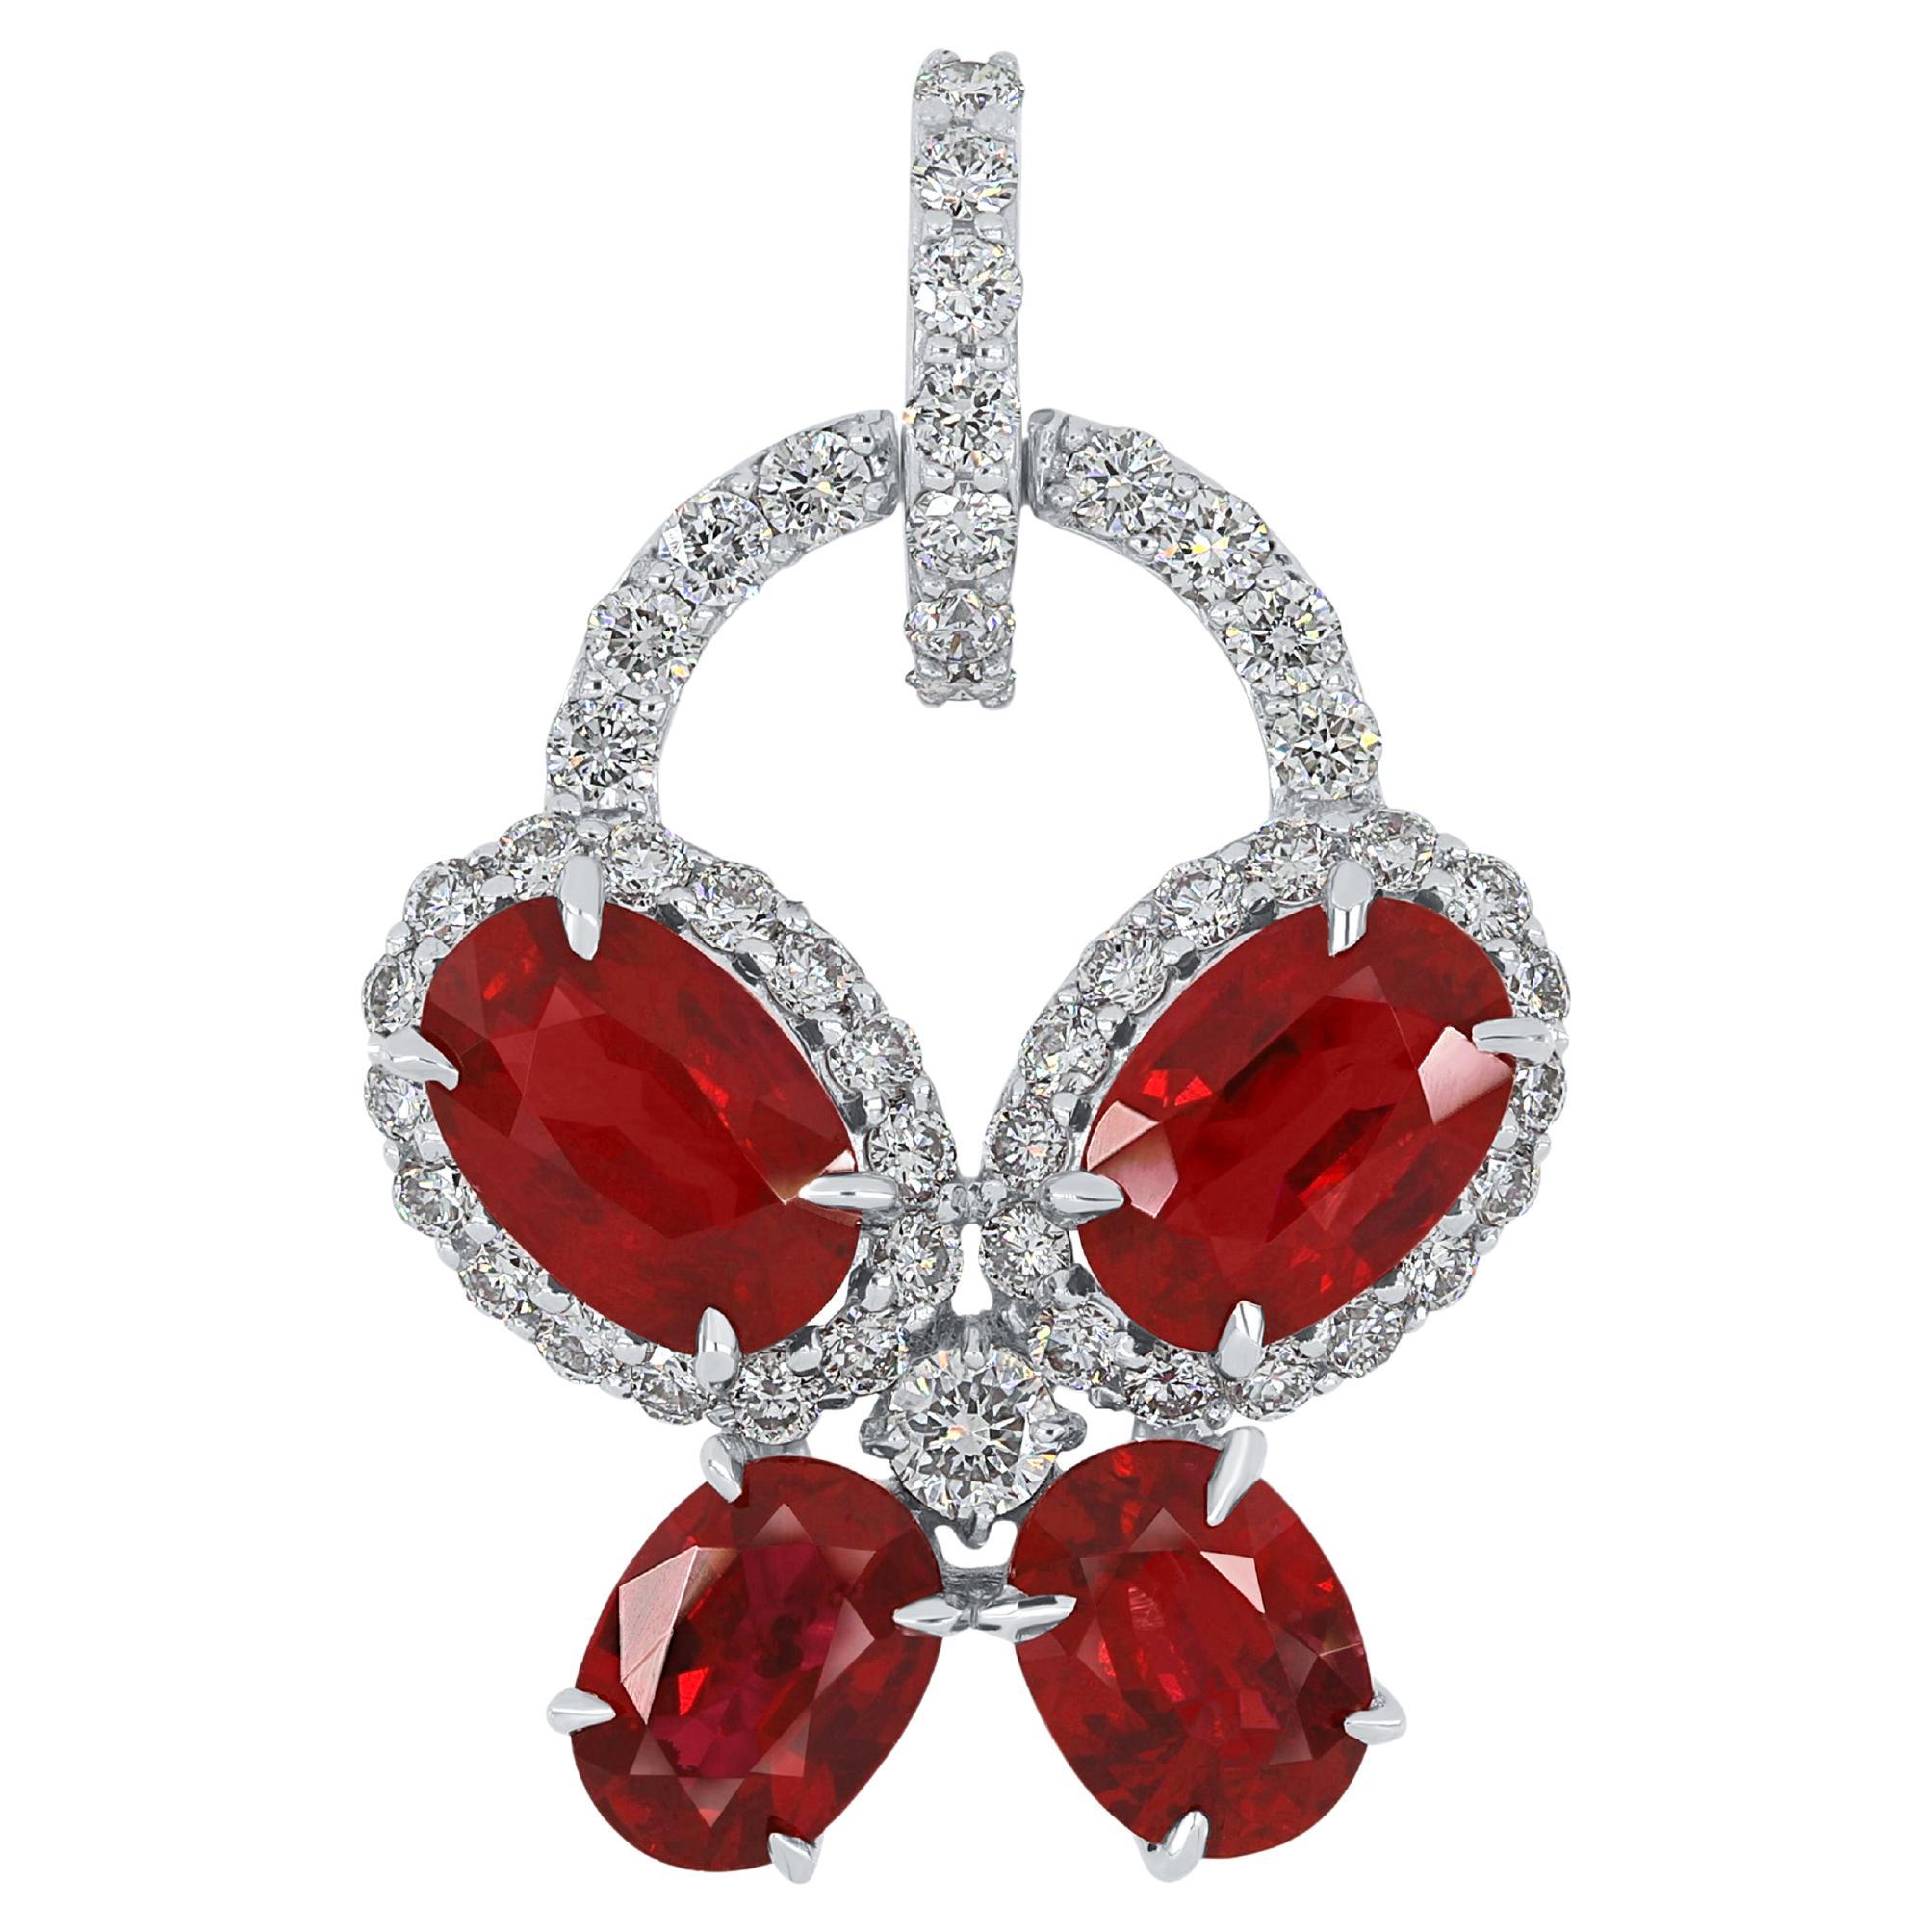 Mozambique Ruby and Diamond Studded Pendant in 18 Karat White Gold